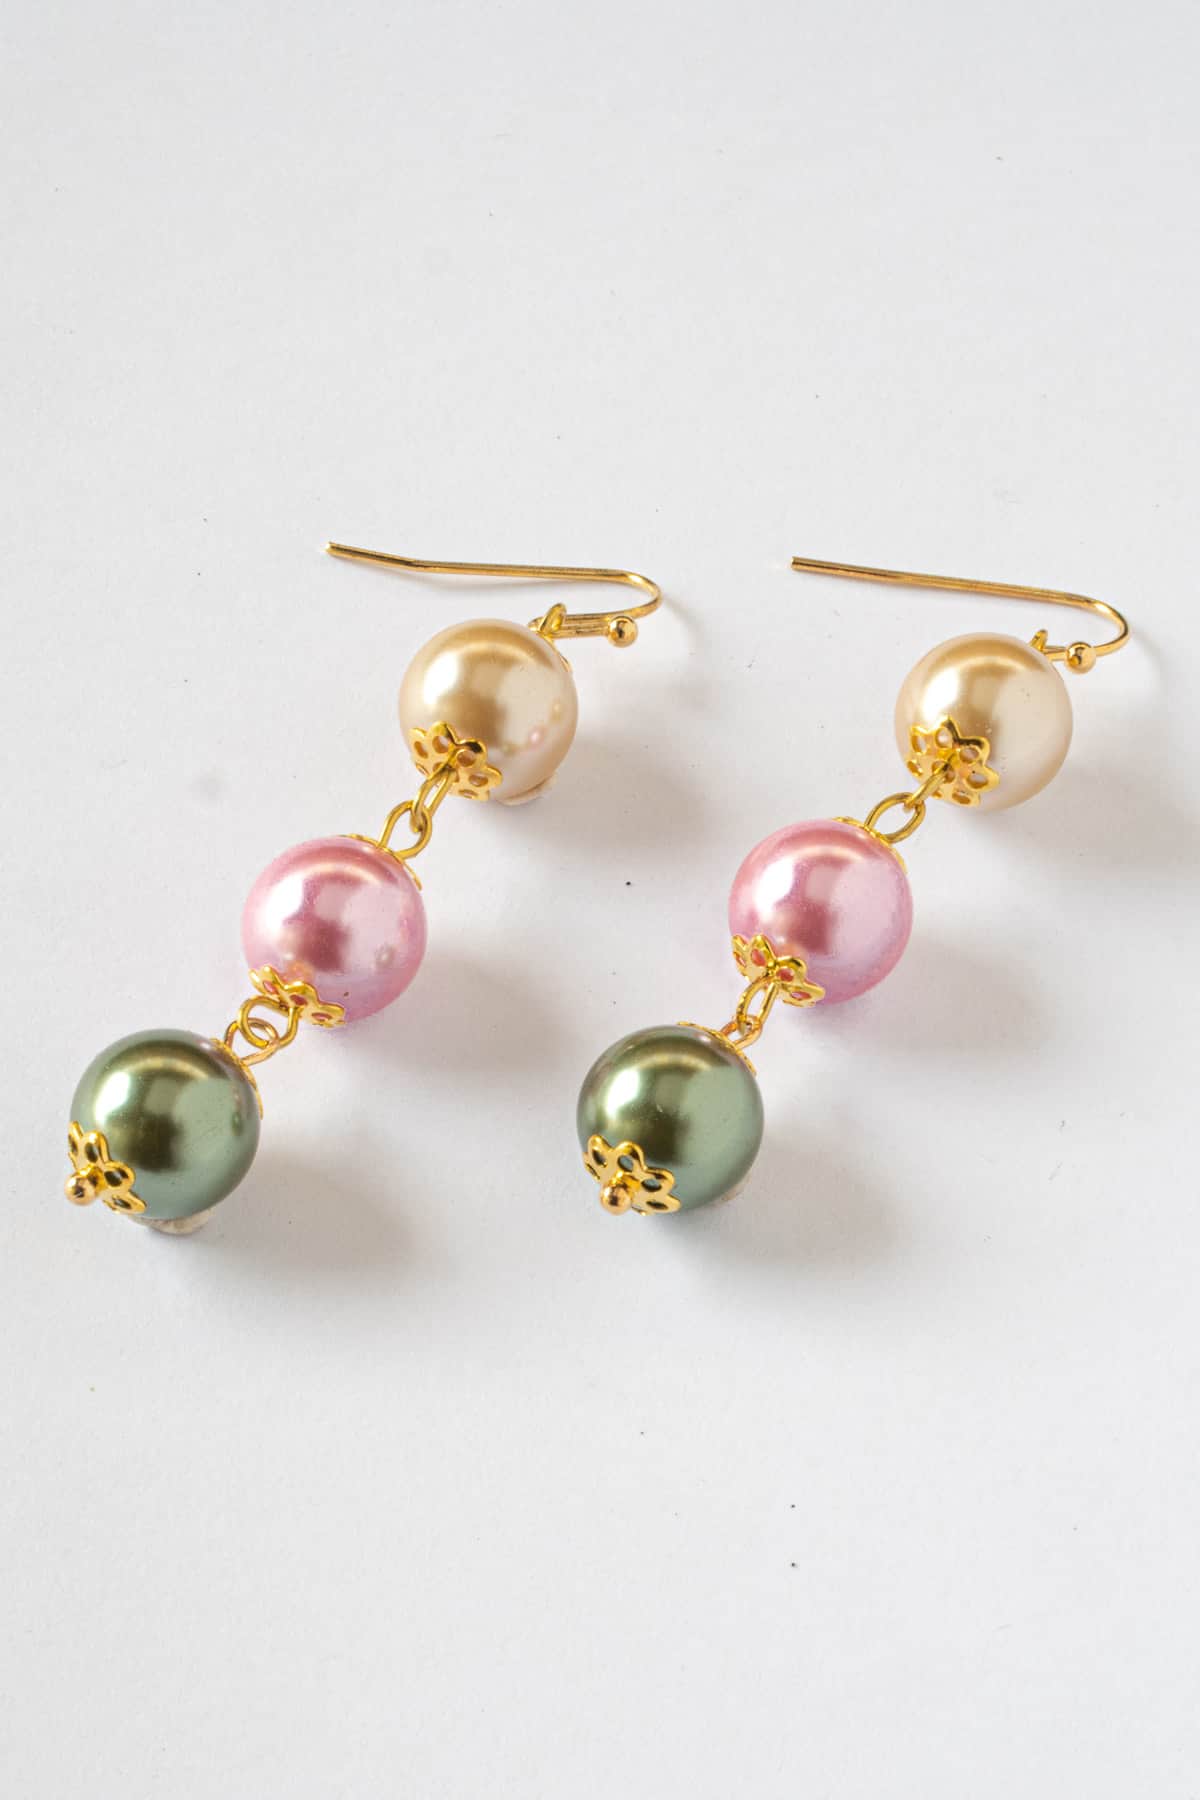 A pair of long earrings in green, pink and champagne.